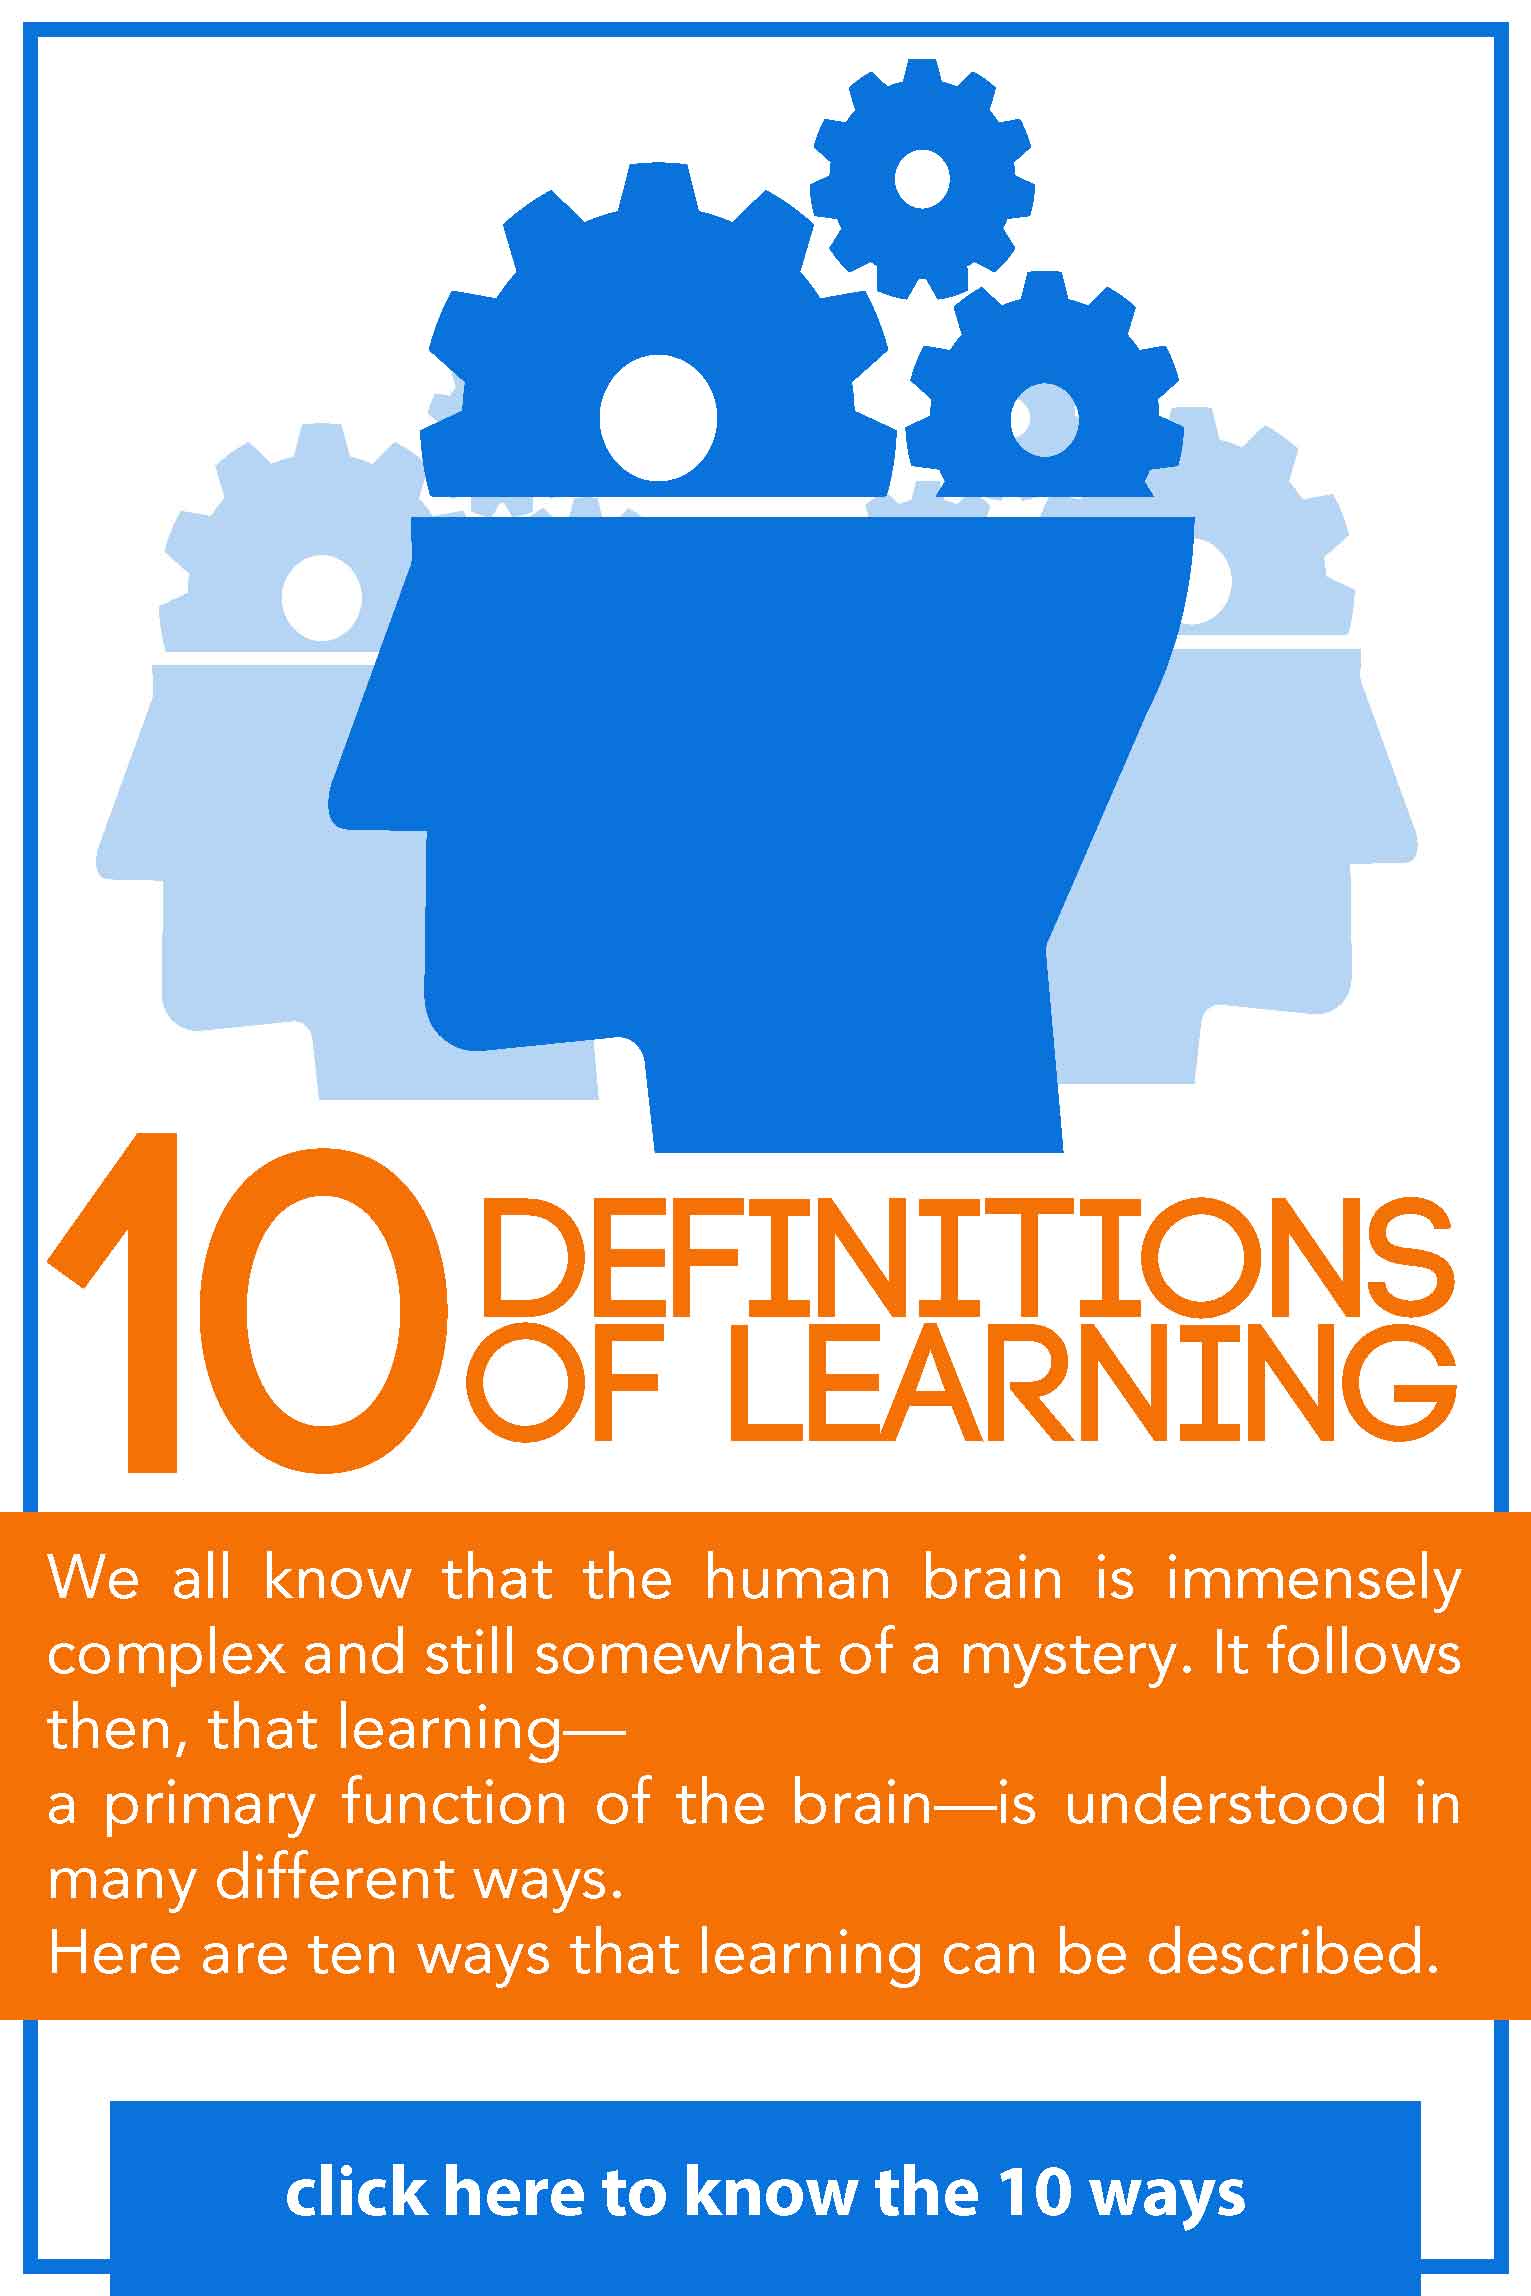 10 Definitions of Learning